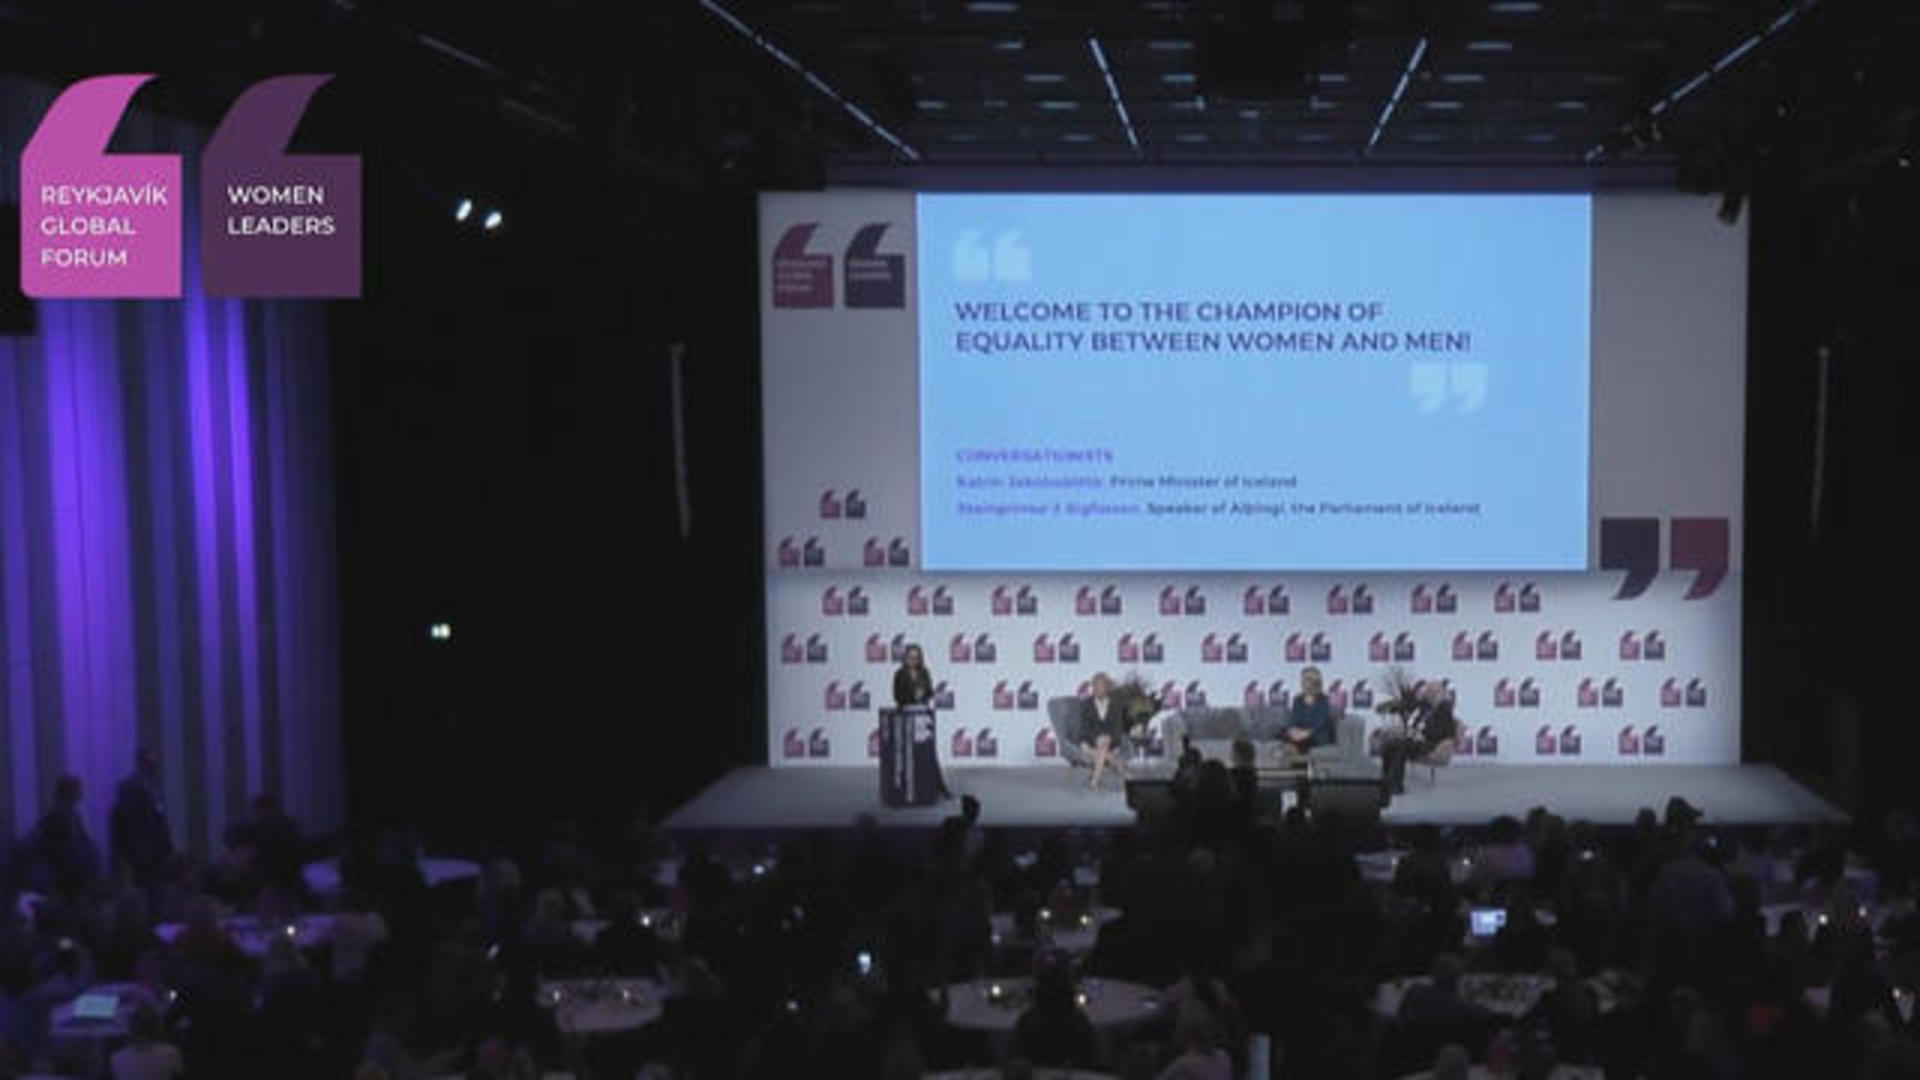 Welcome Address 2019 Women Leaders Global Forum Cbs News Images, Photos, Reviews